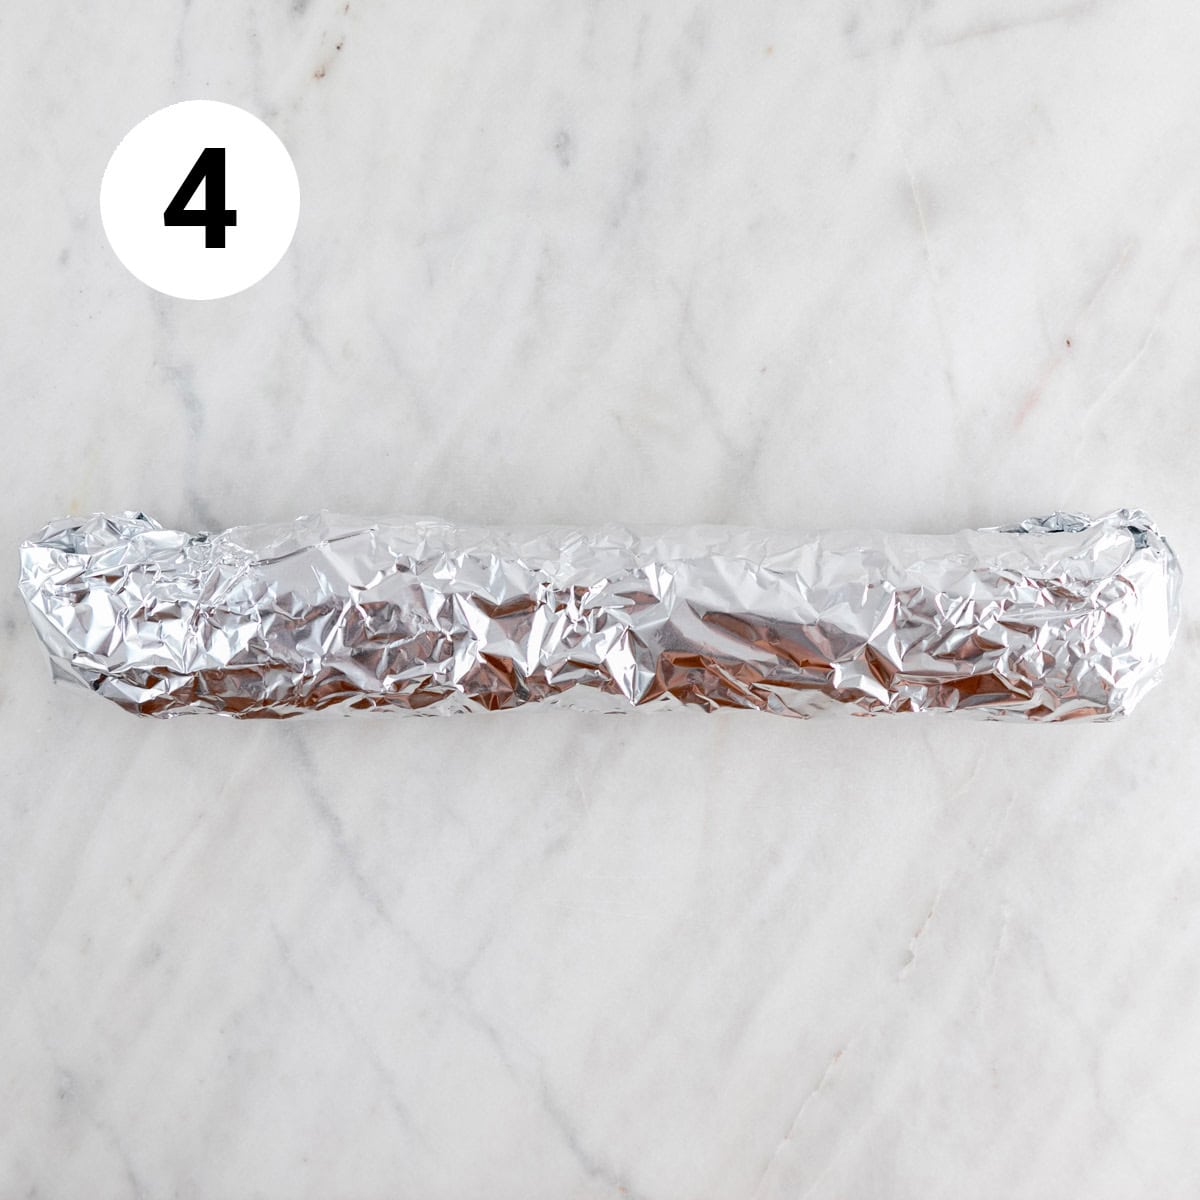 Baguette wrapped with foil.